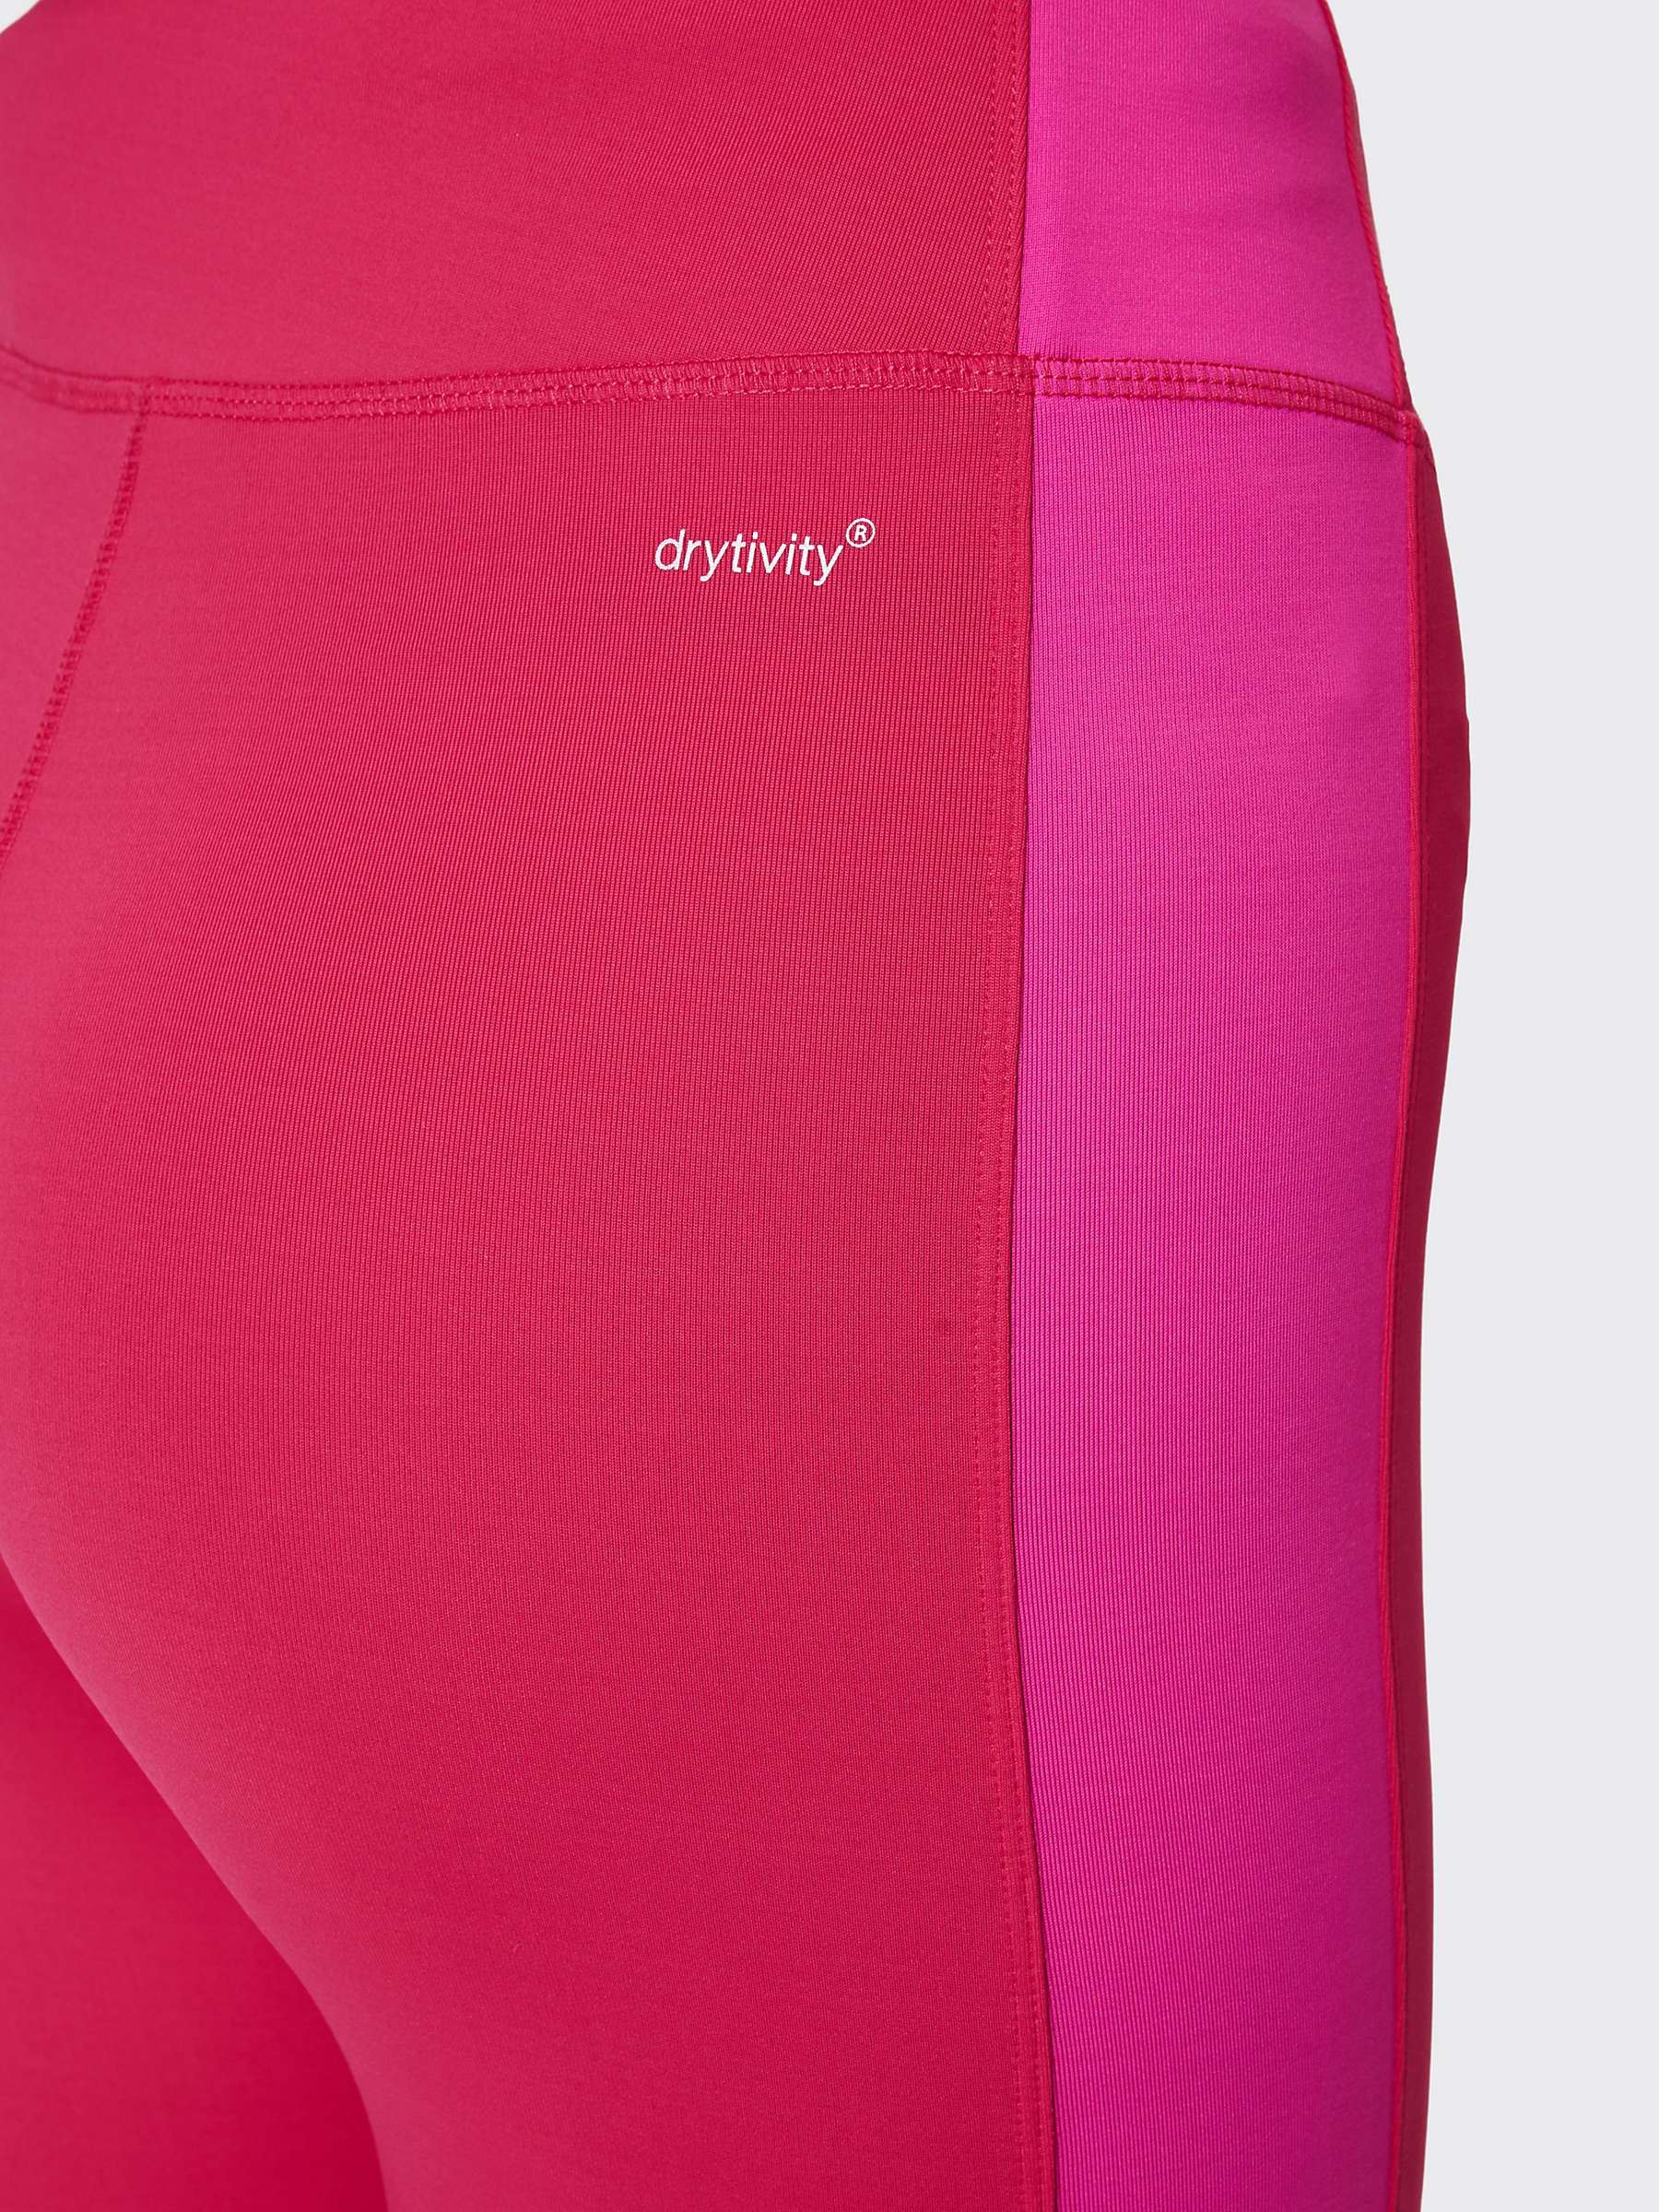 Buy Venice Beach Clifia 7/8 Sports Leggings, Ruby Red/Virtual Pink Online at johnlewis.com